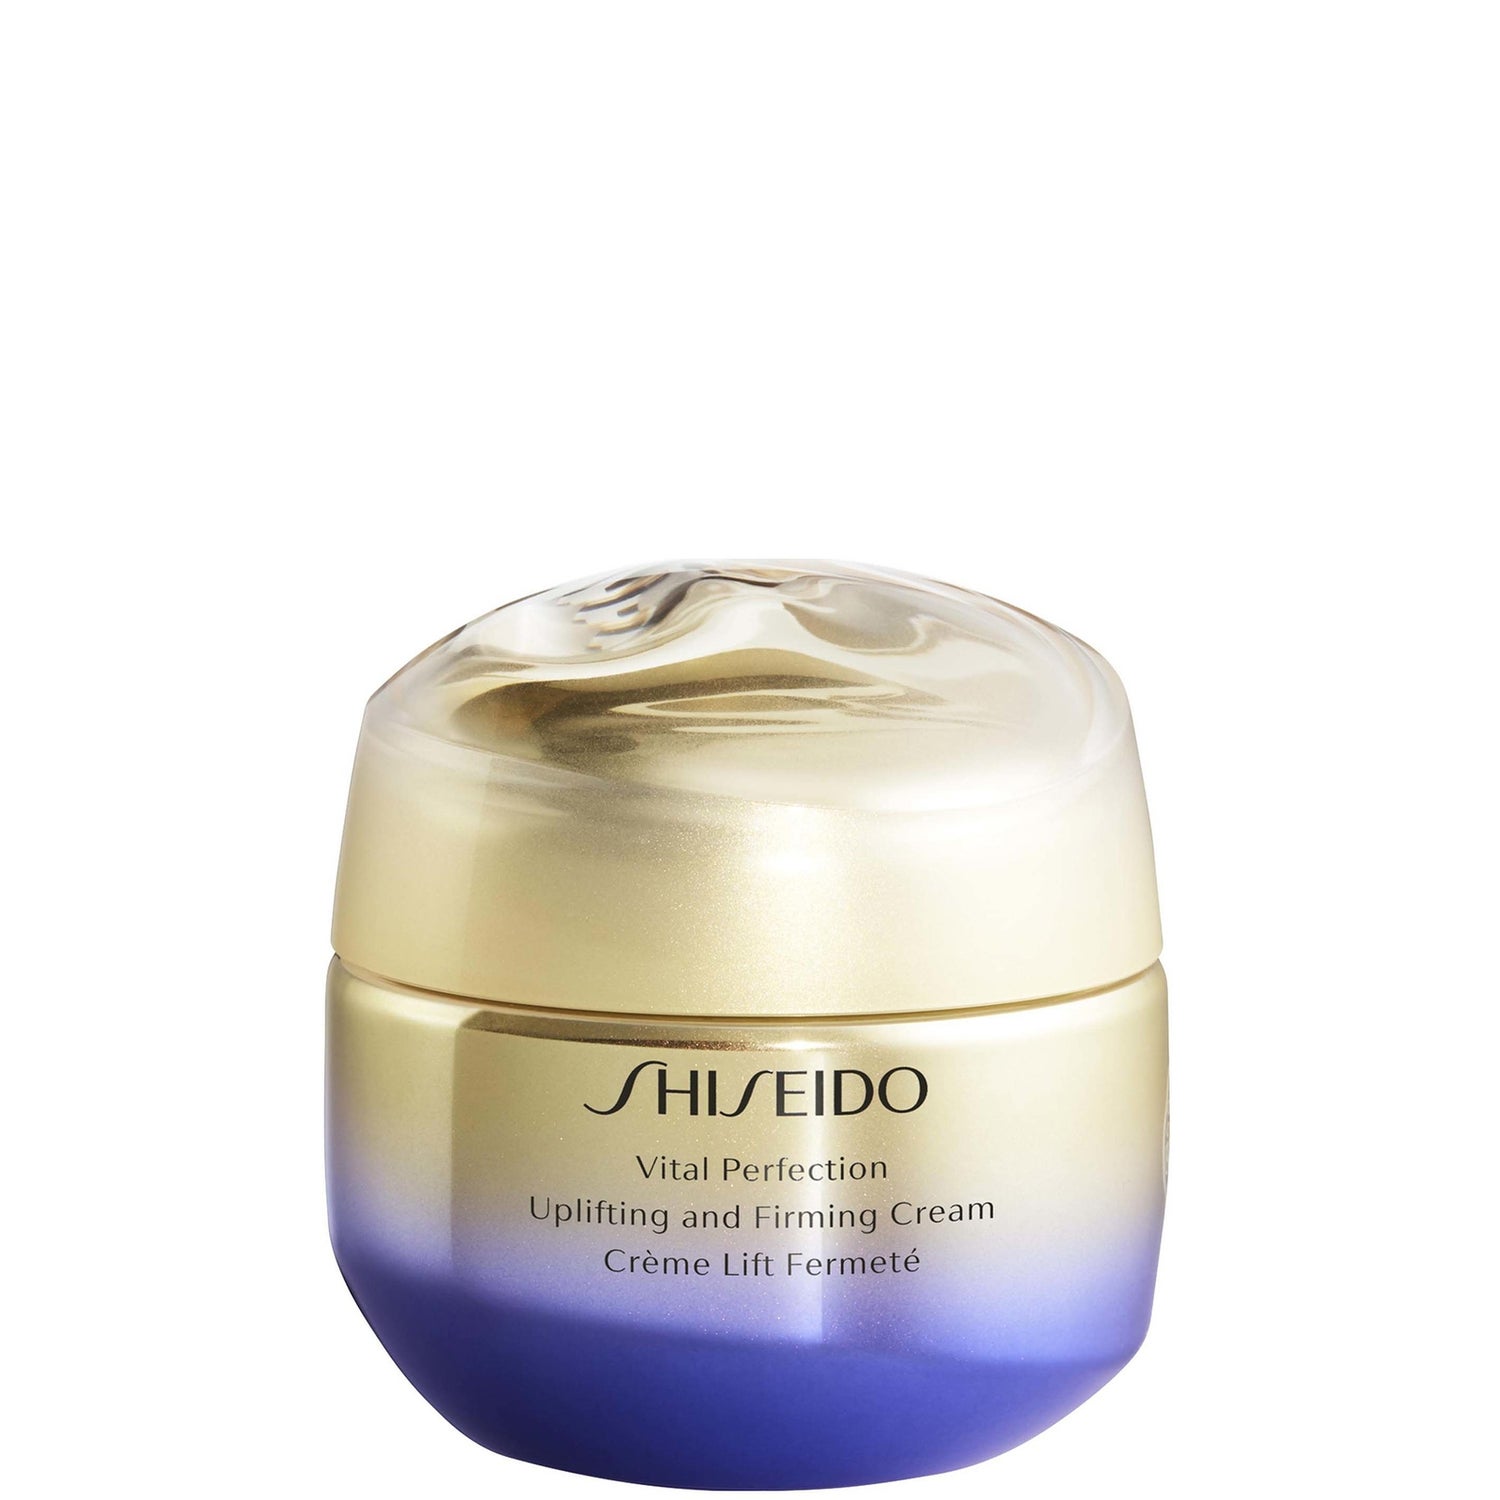 Shiseido Vital Perfection Uplifting and Firming Cream (Diverses tailles)